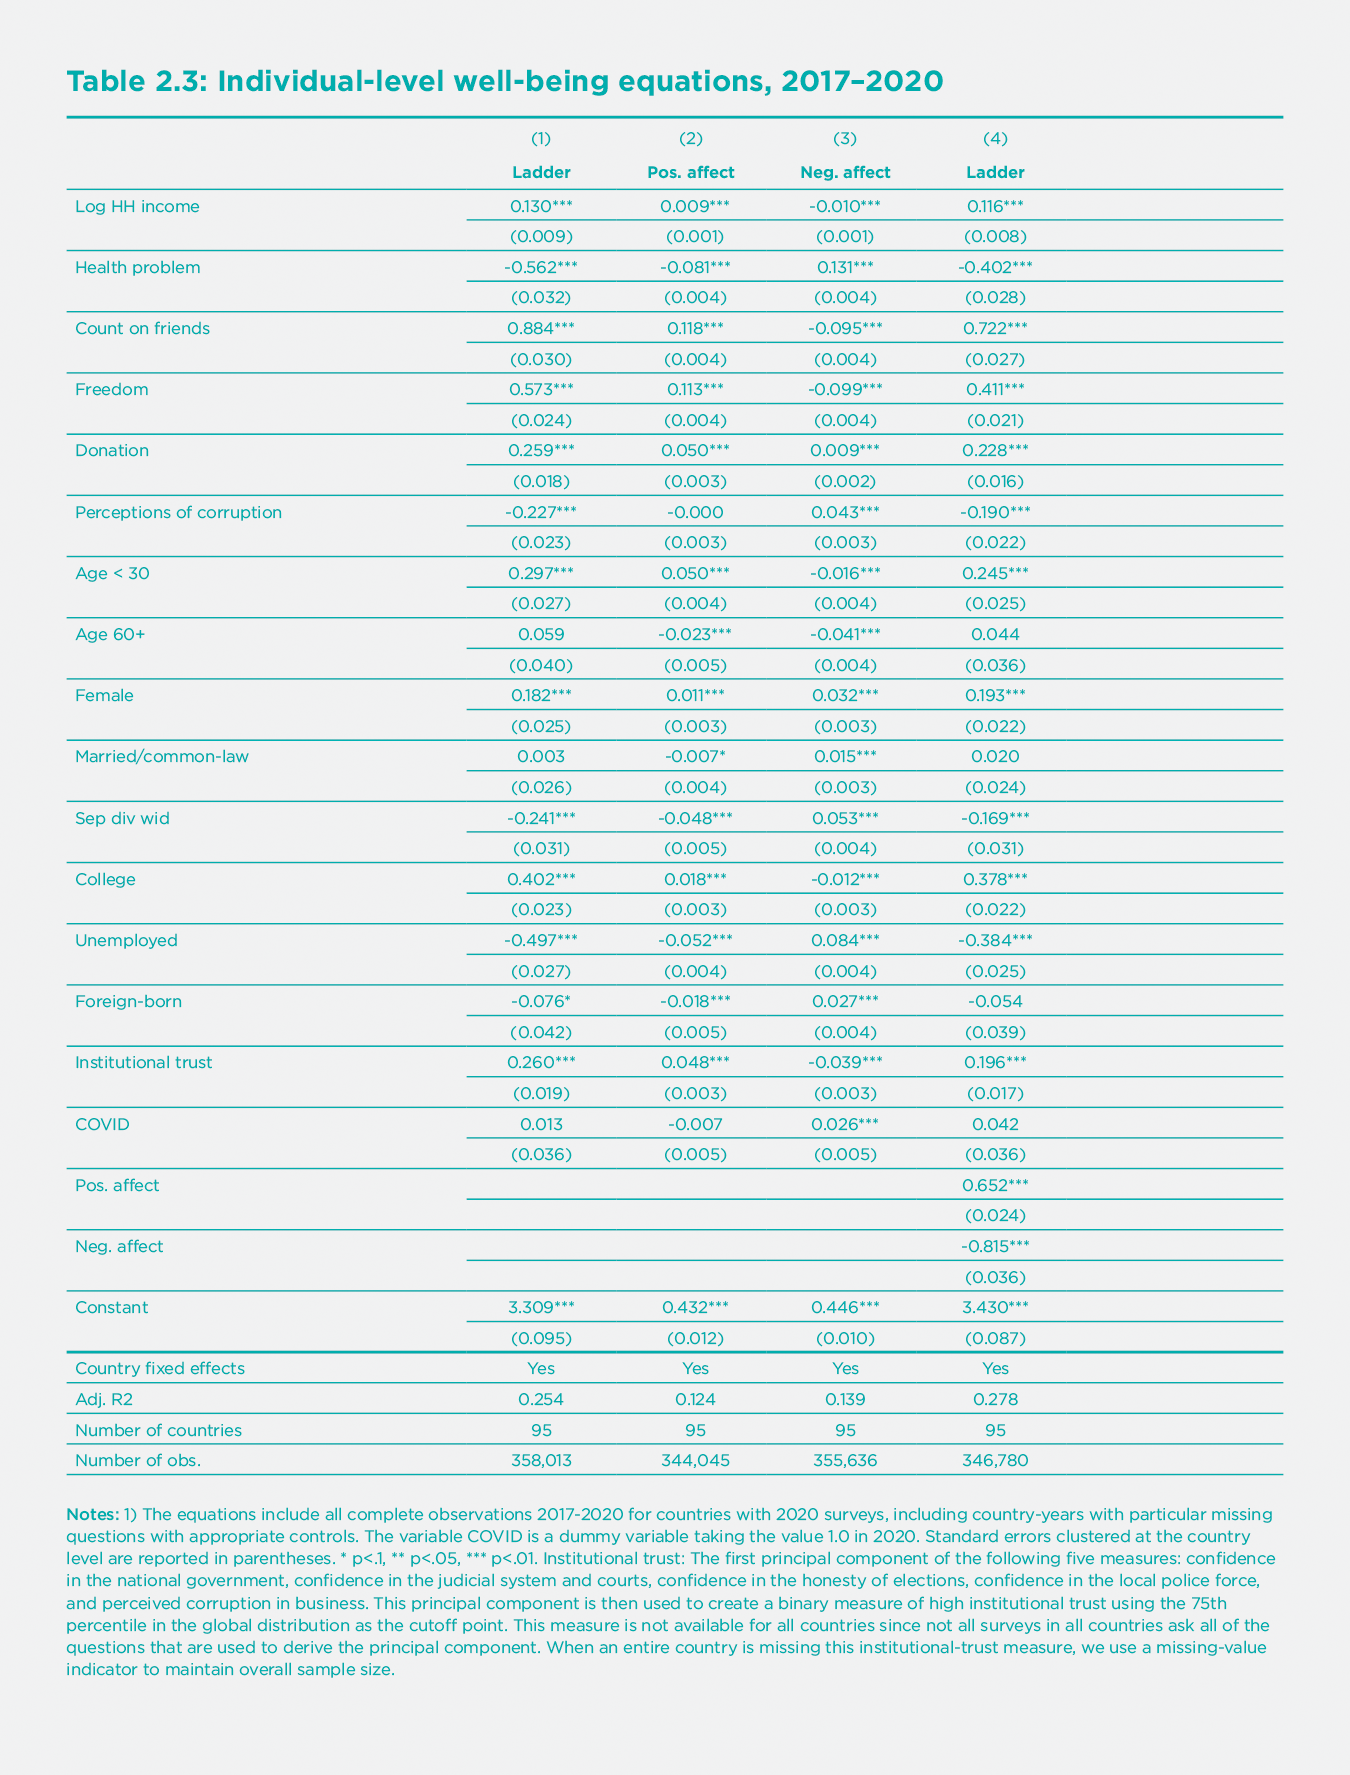 Table 2.3. Individual-level well-being equations, 2017-2020